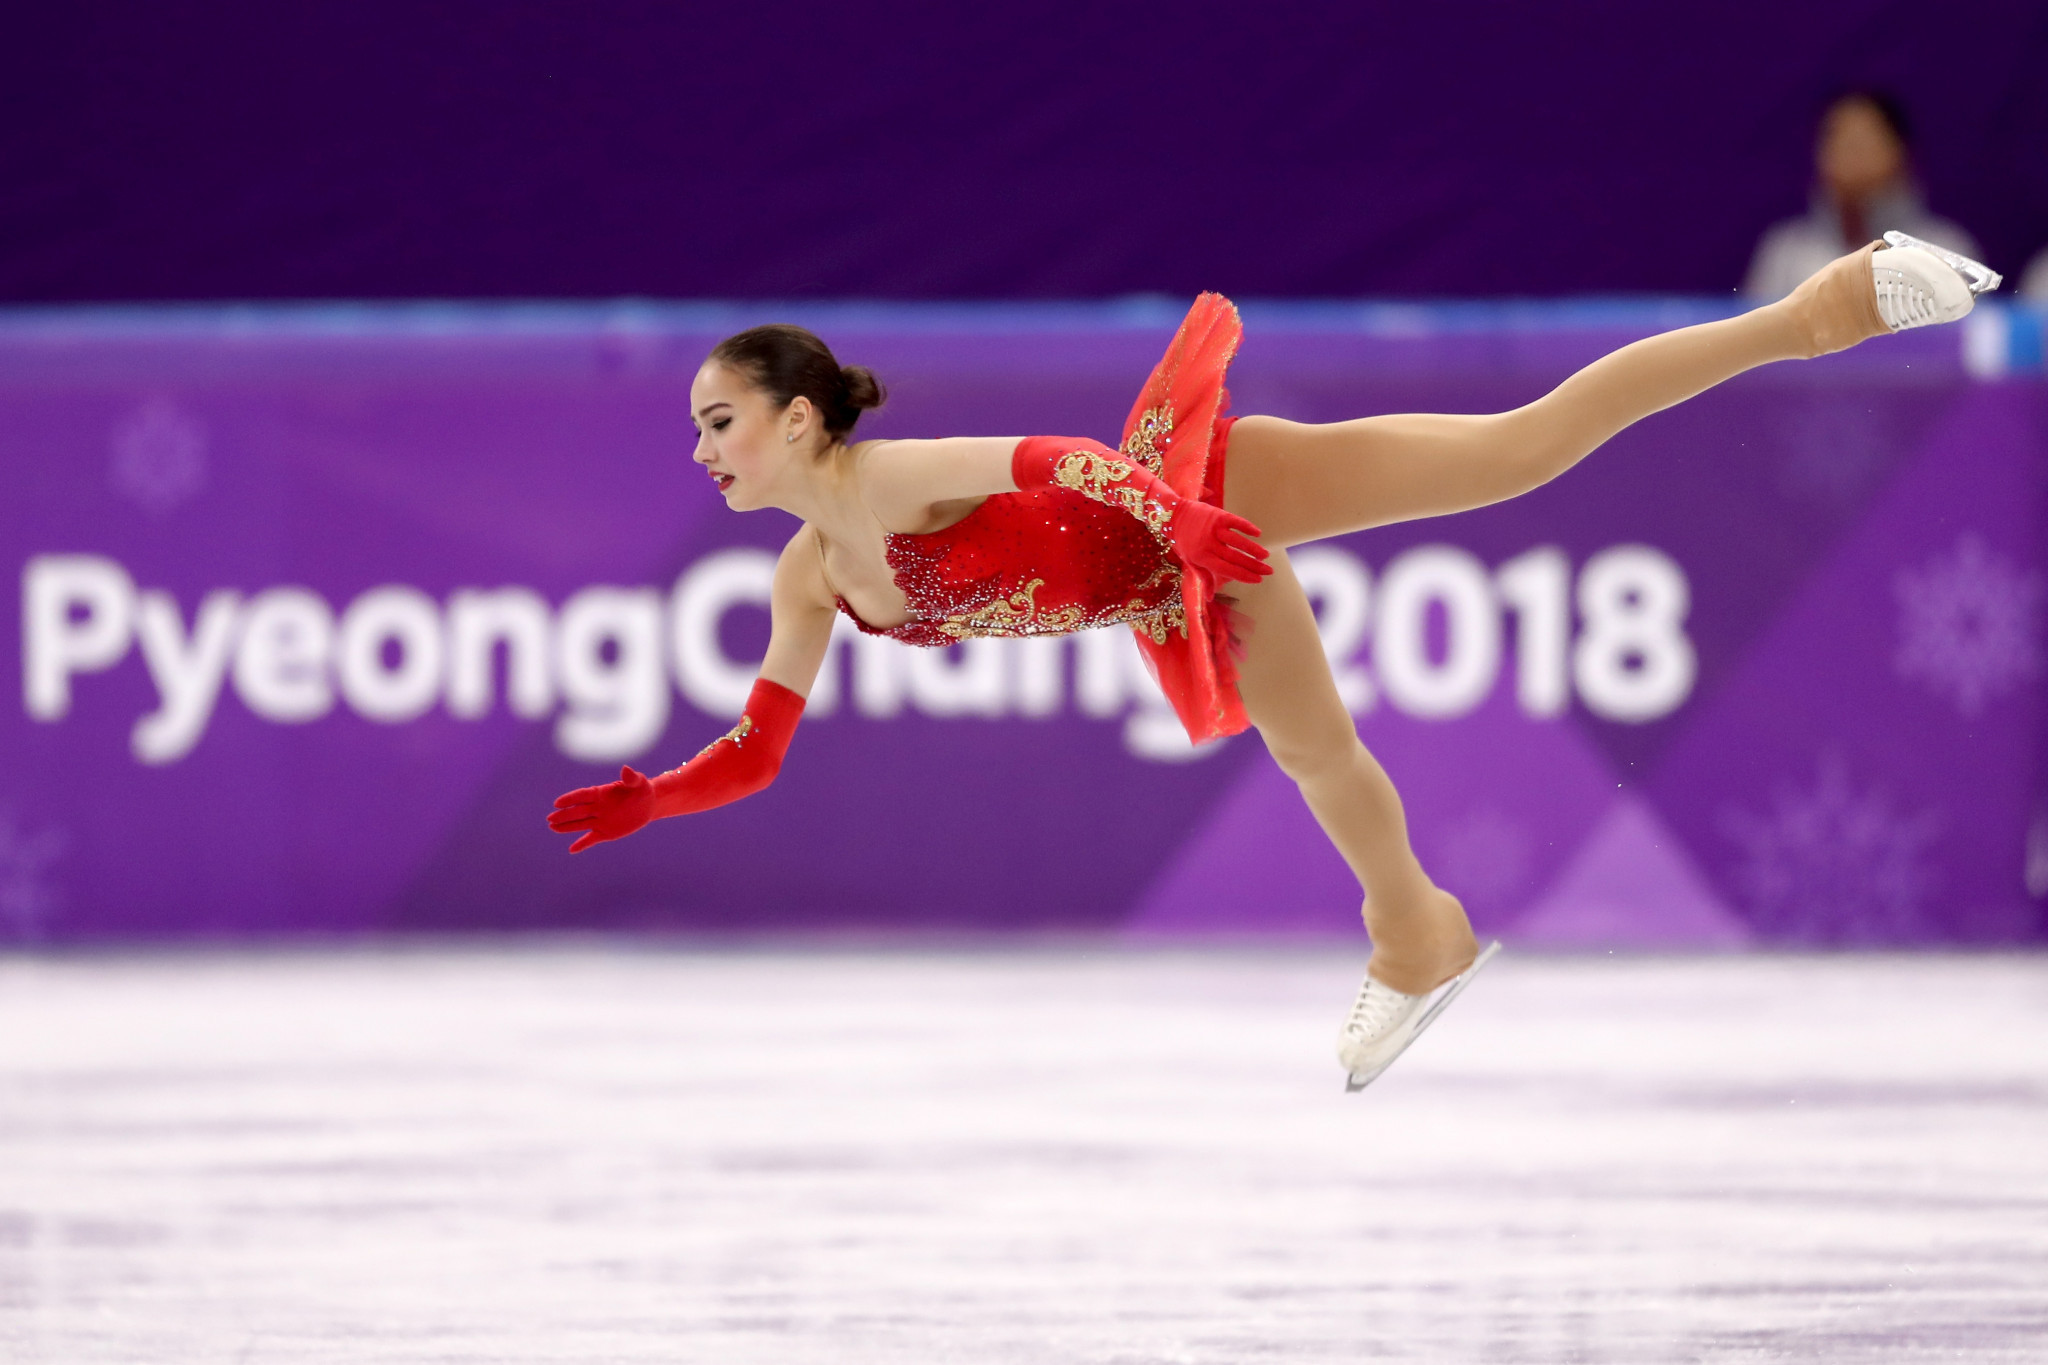 Alina Zagitova claimed the Olympic title in Pyeongchang at the age of 15 ©Getty Images